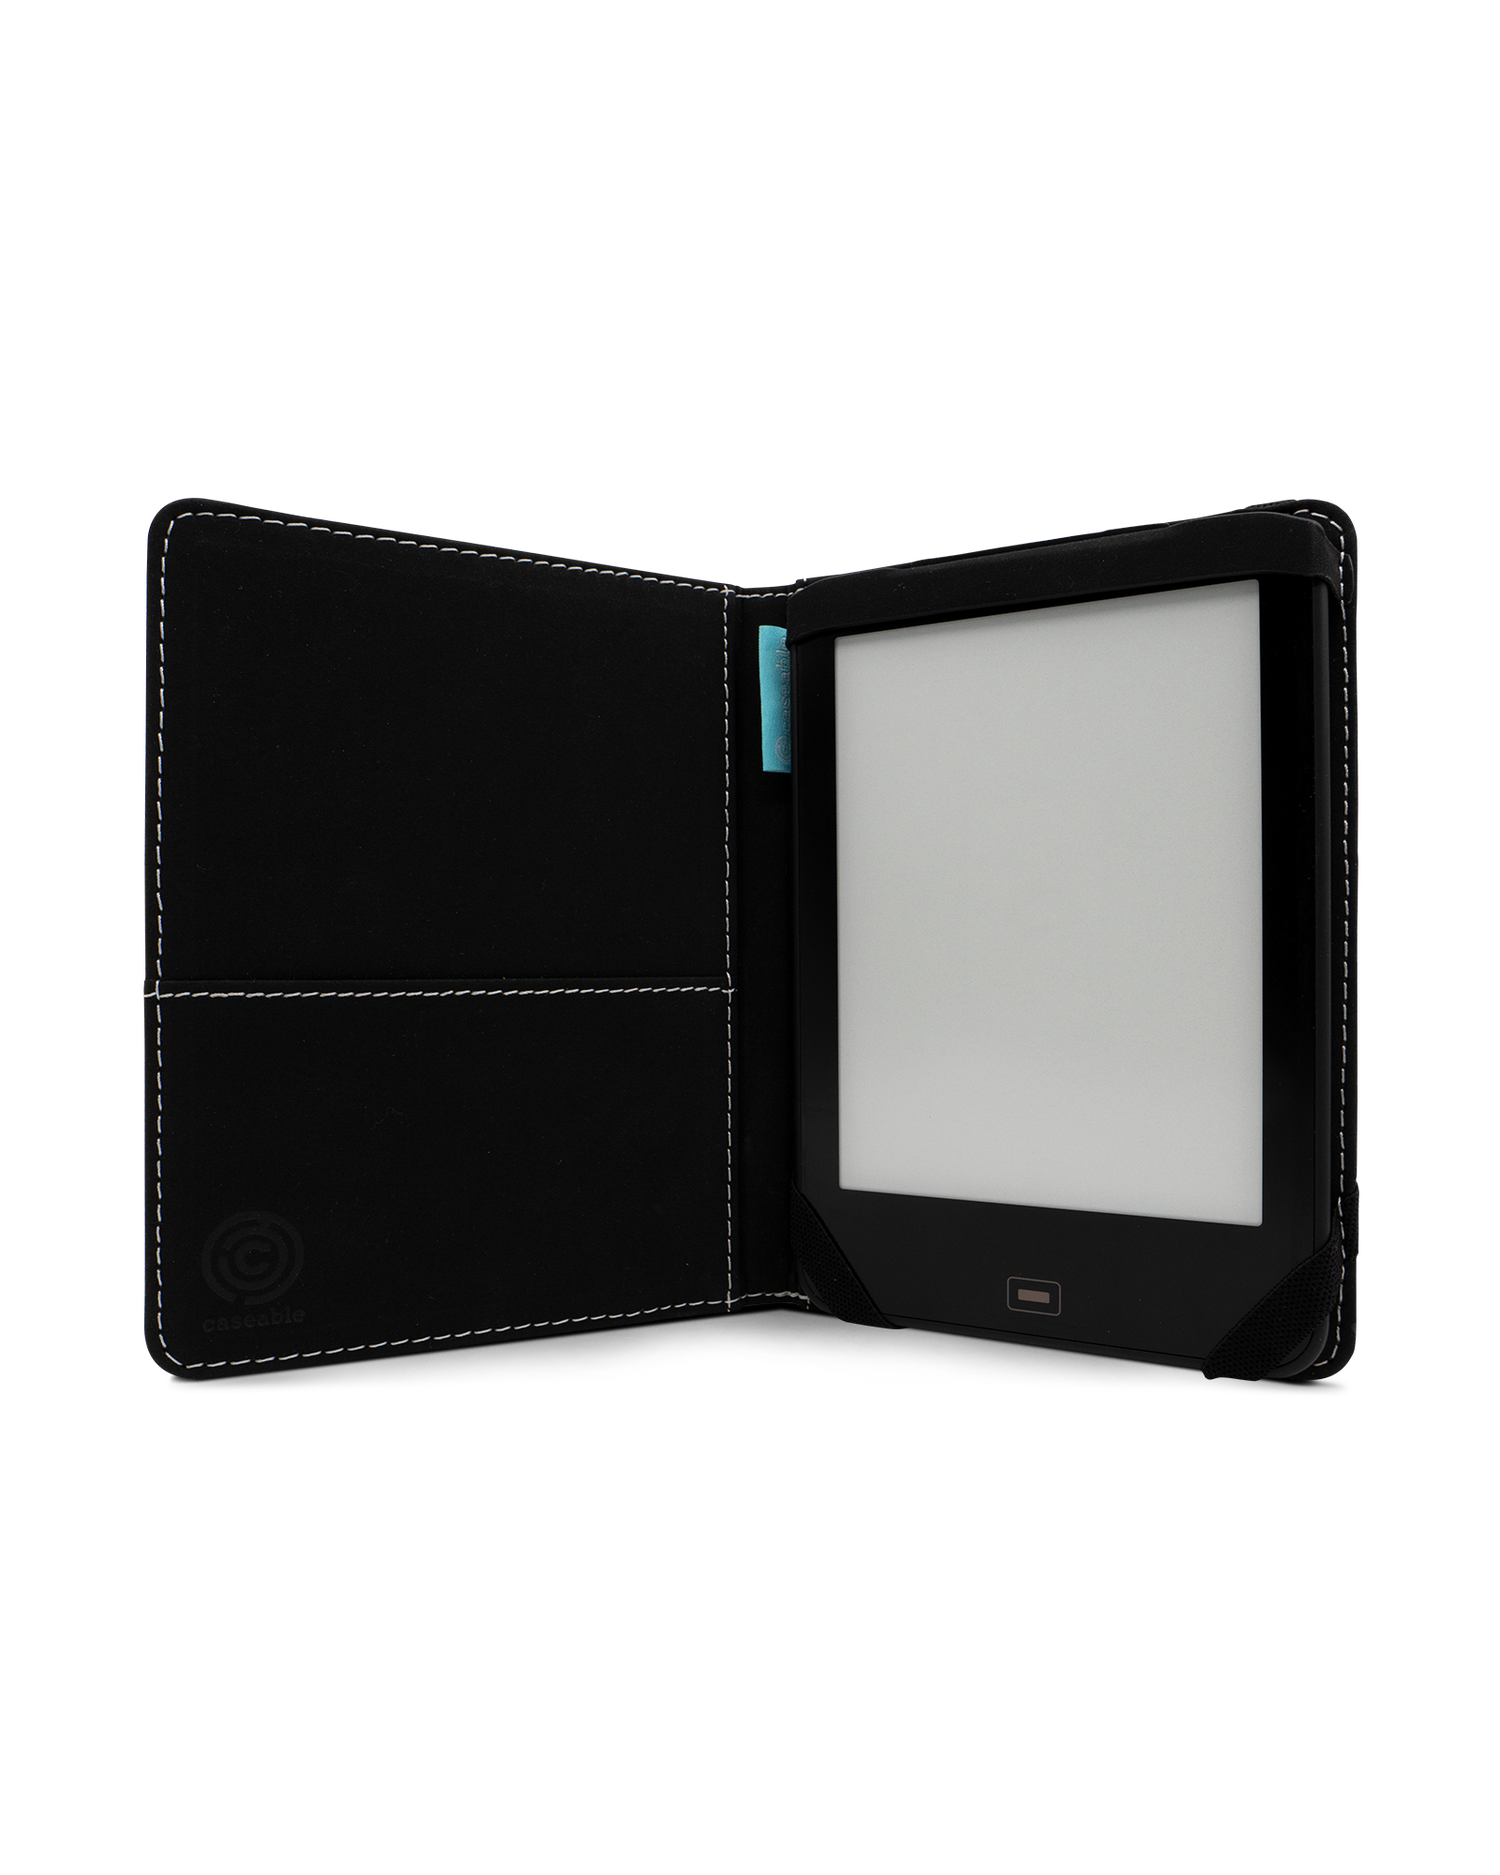 Washed Out Plaid eReader Case for tolino vision 1 to 4 HD: Opened interior view